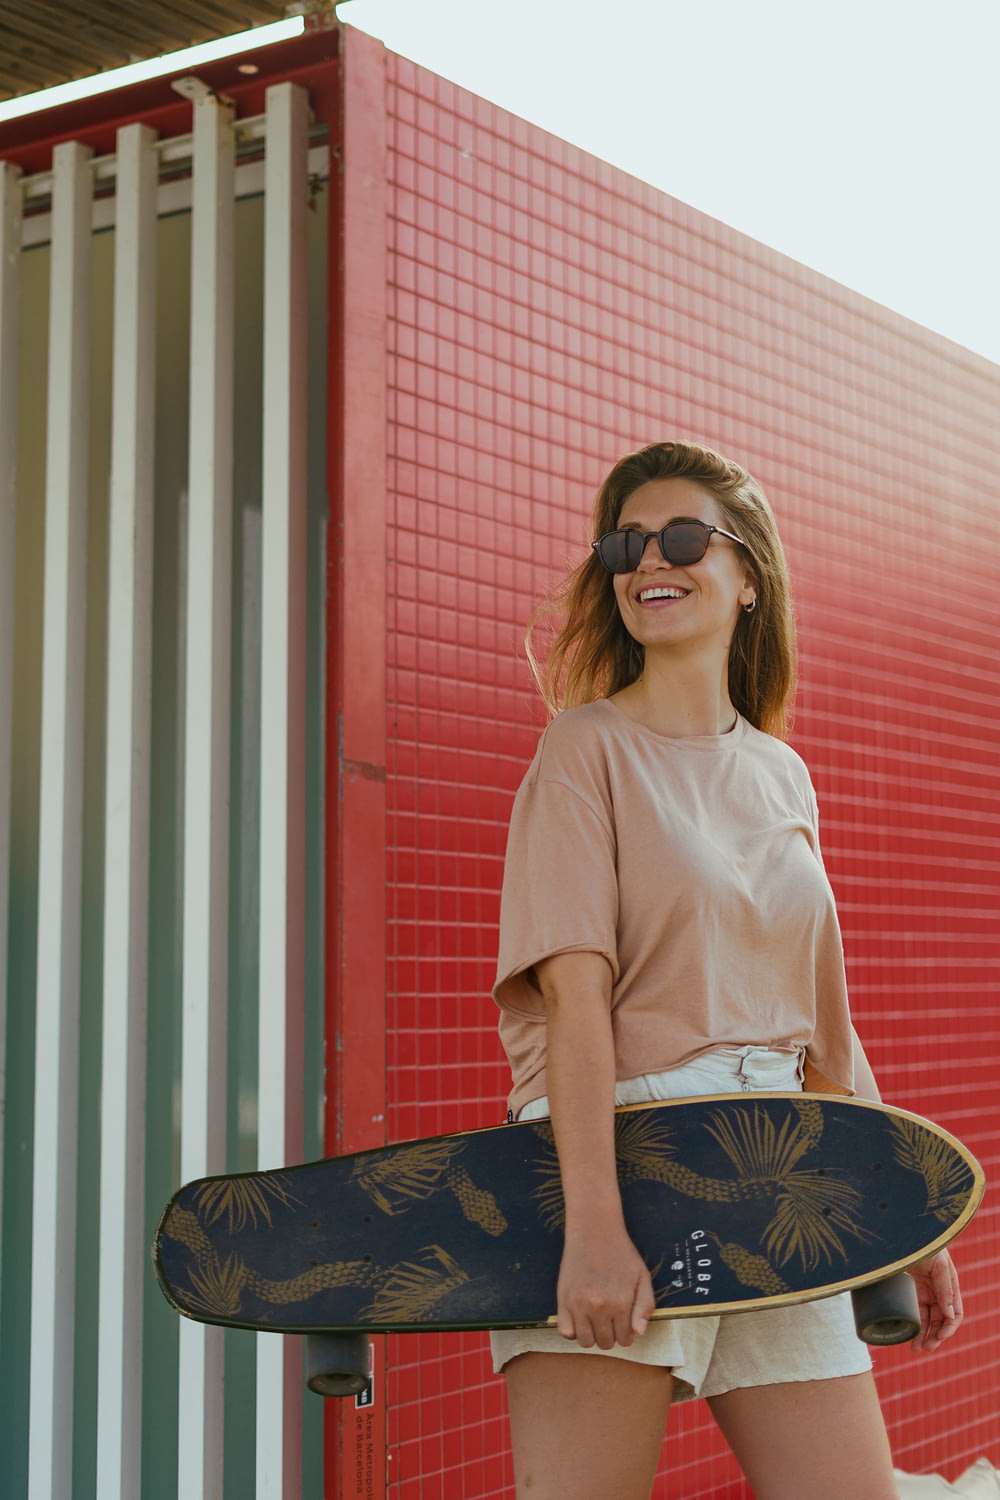 a woman holding a skateboard in front of a building